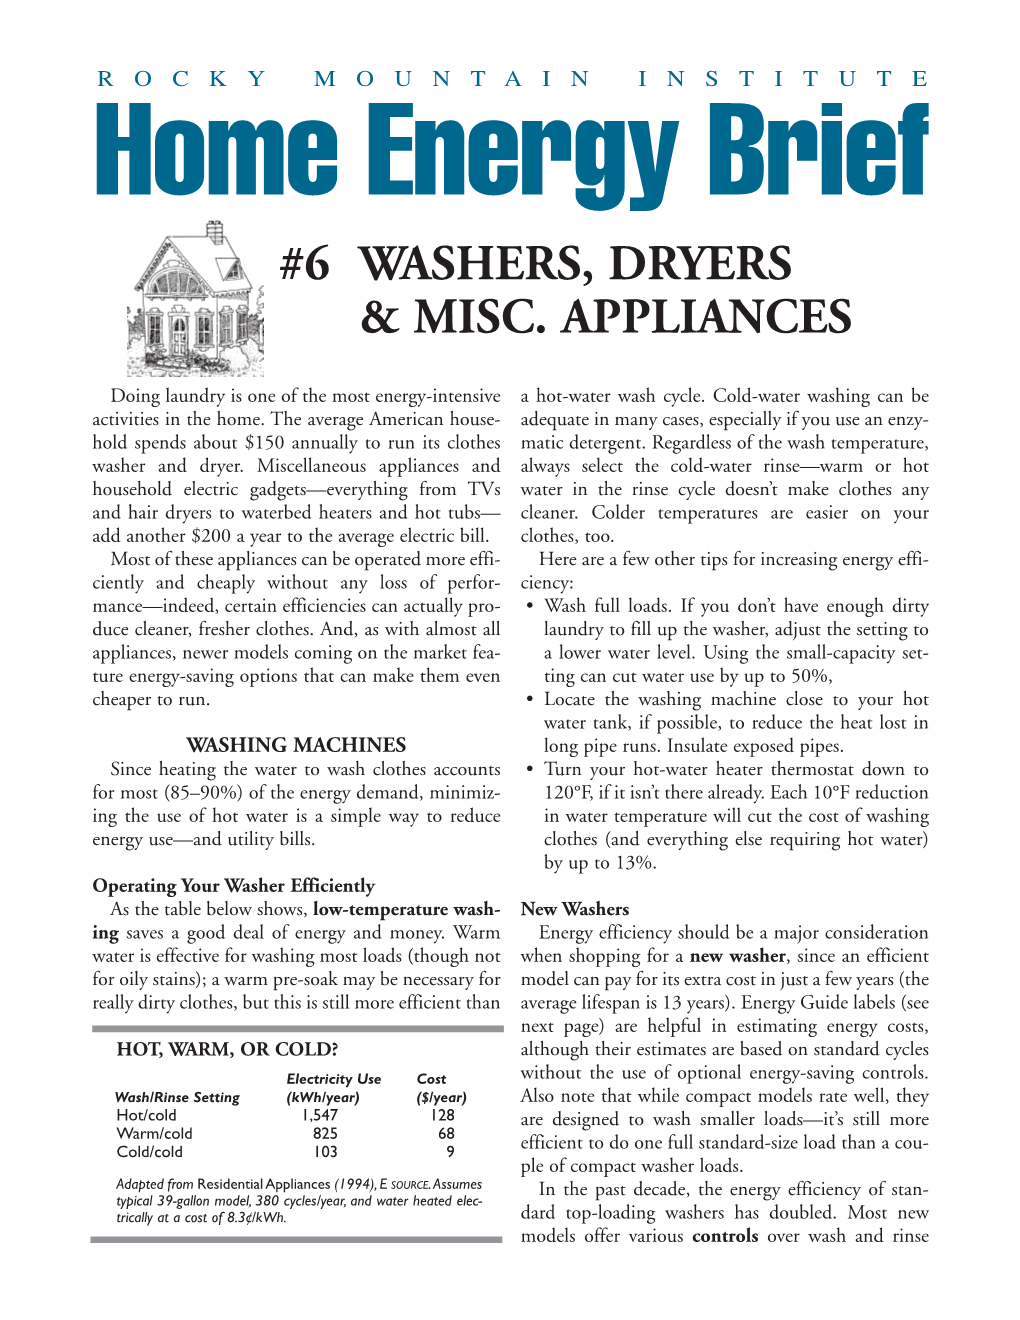 Home Energy Brief—Washers, Dryers & Misc. Appliances